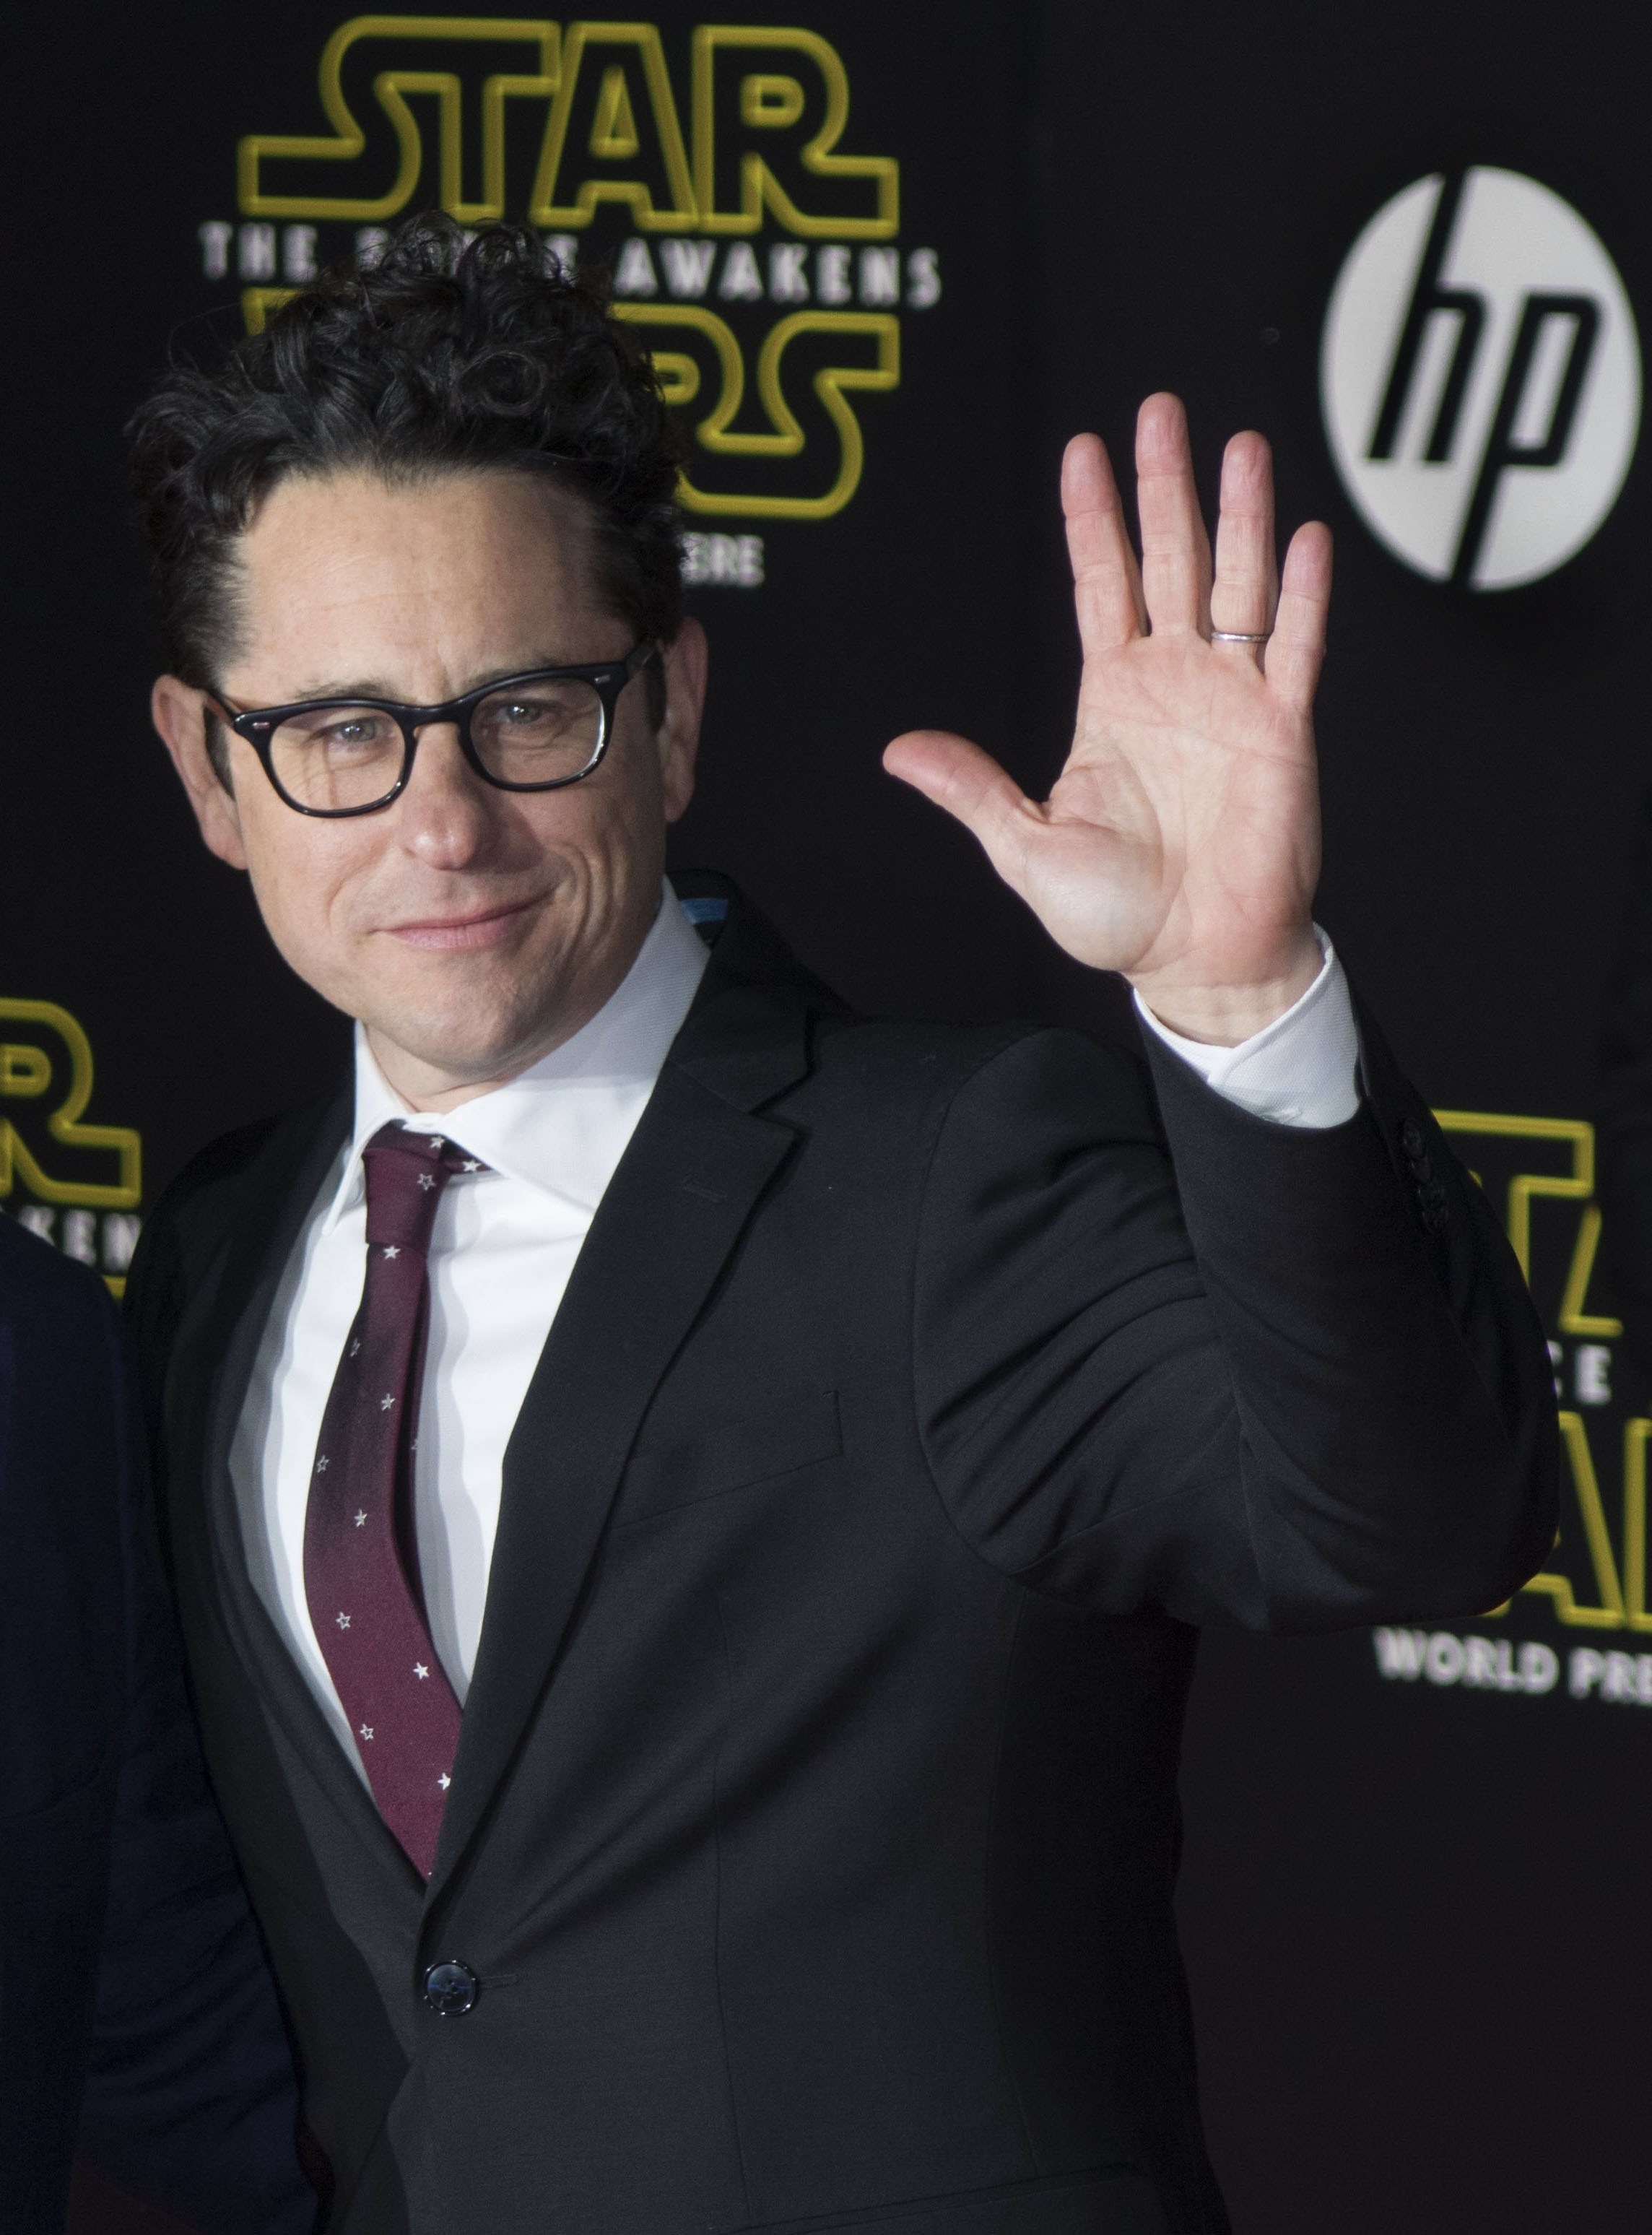 US film director J.J. Abrams’ production company Bad Robot has teamed up with Capitol Music Group to launch the indie music label Loud Robot. Photo: EPA-EFE